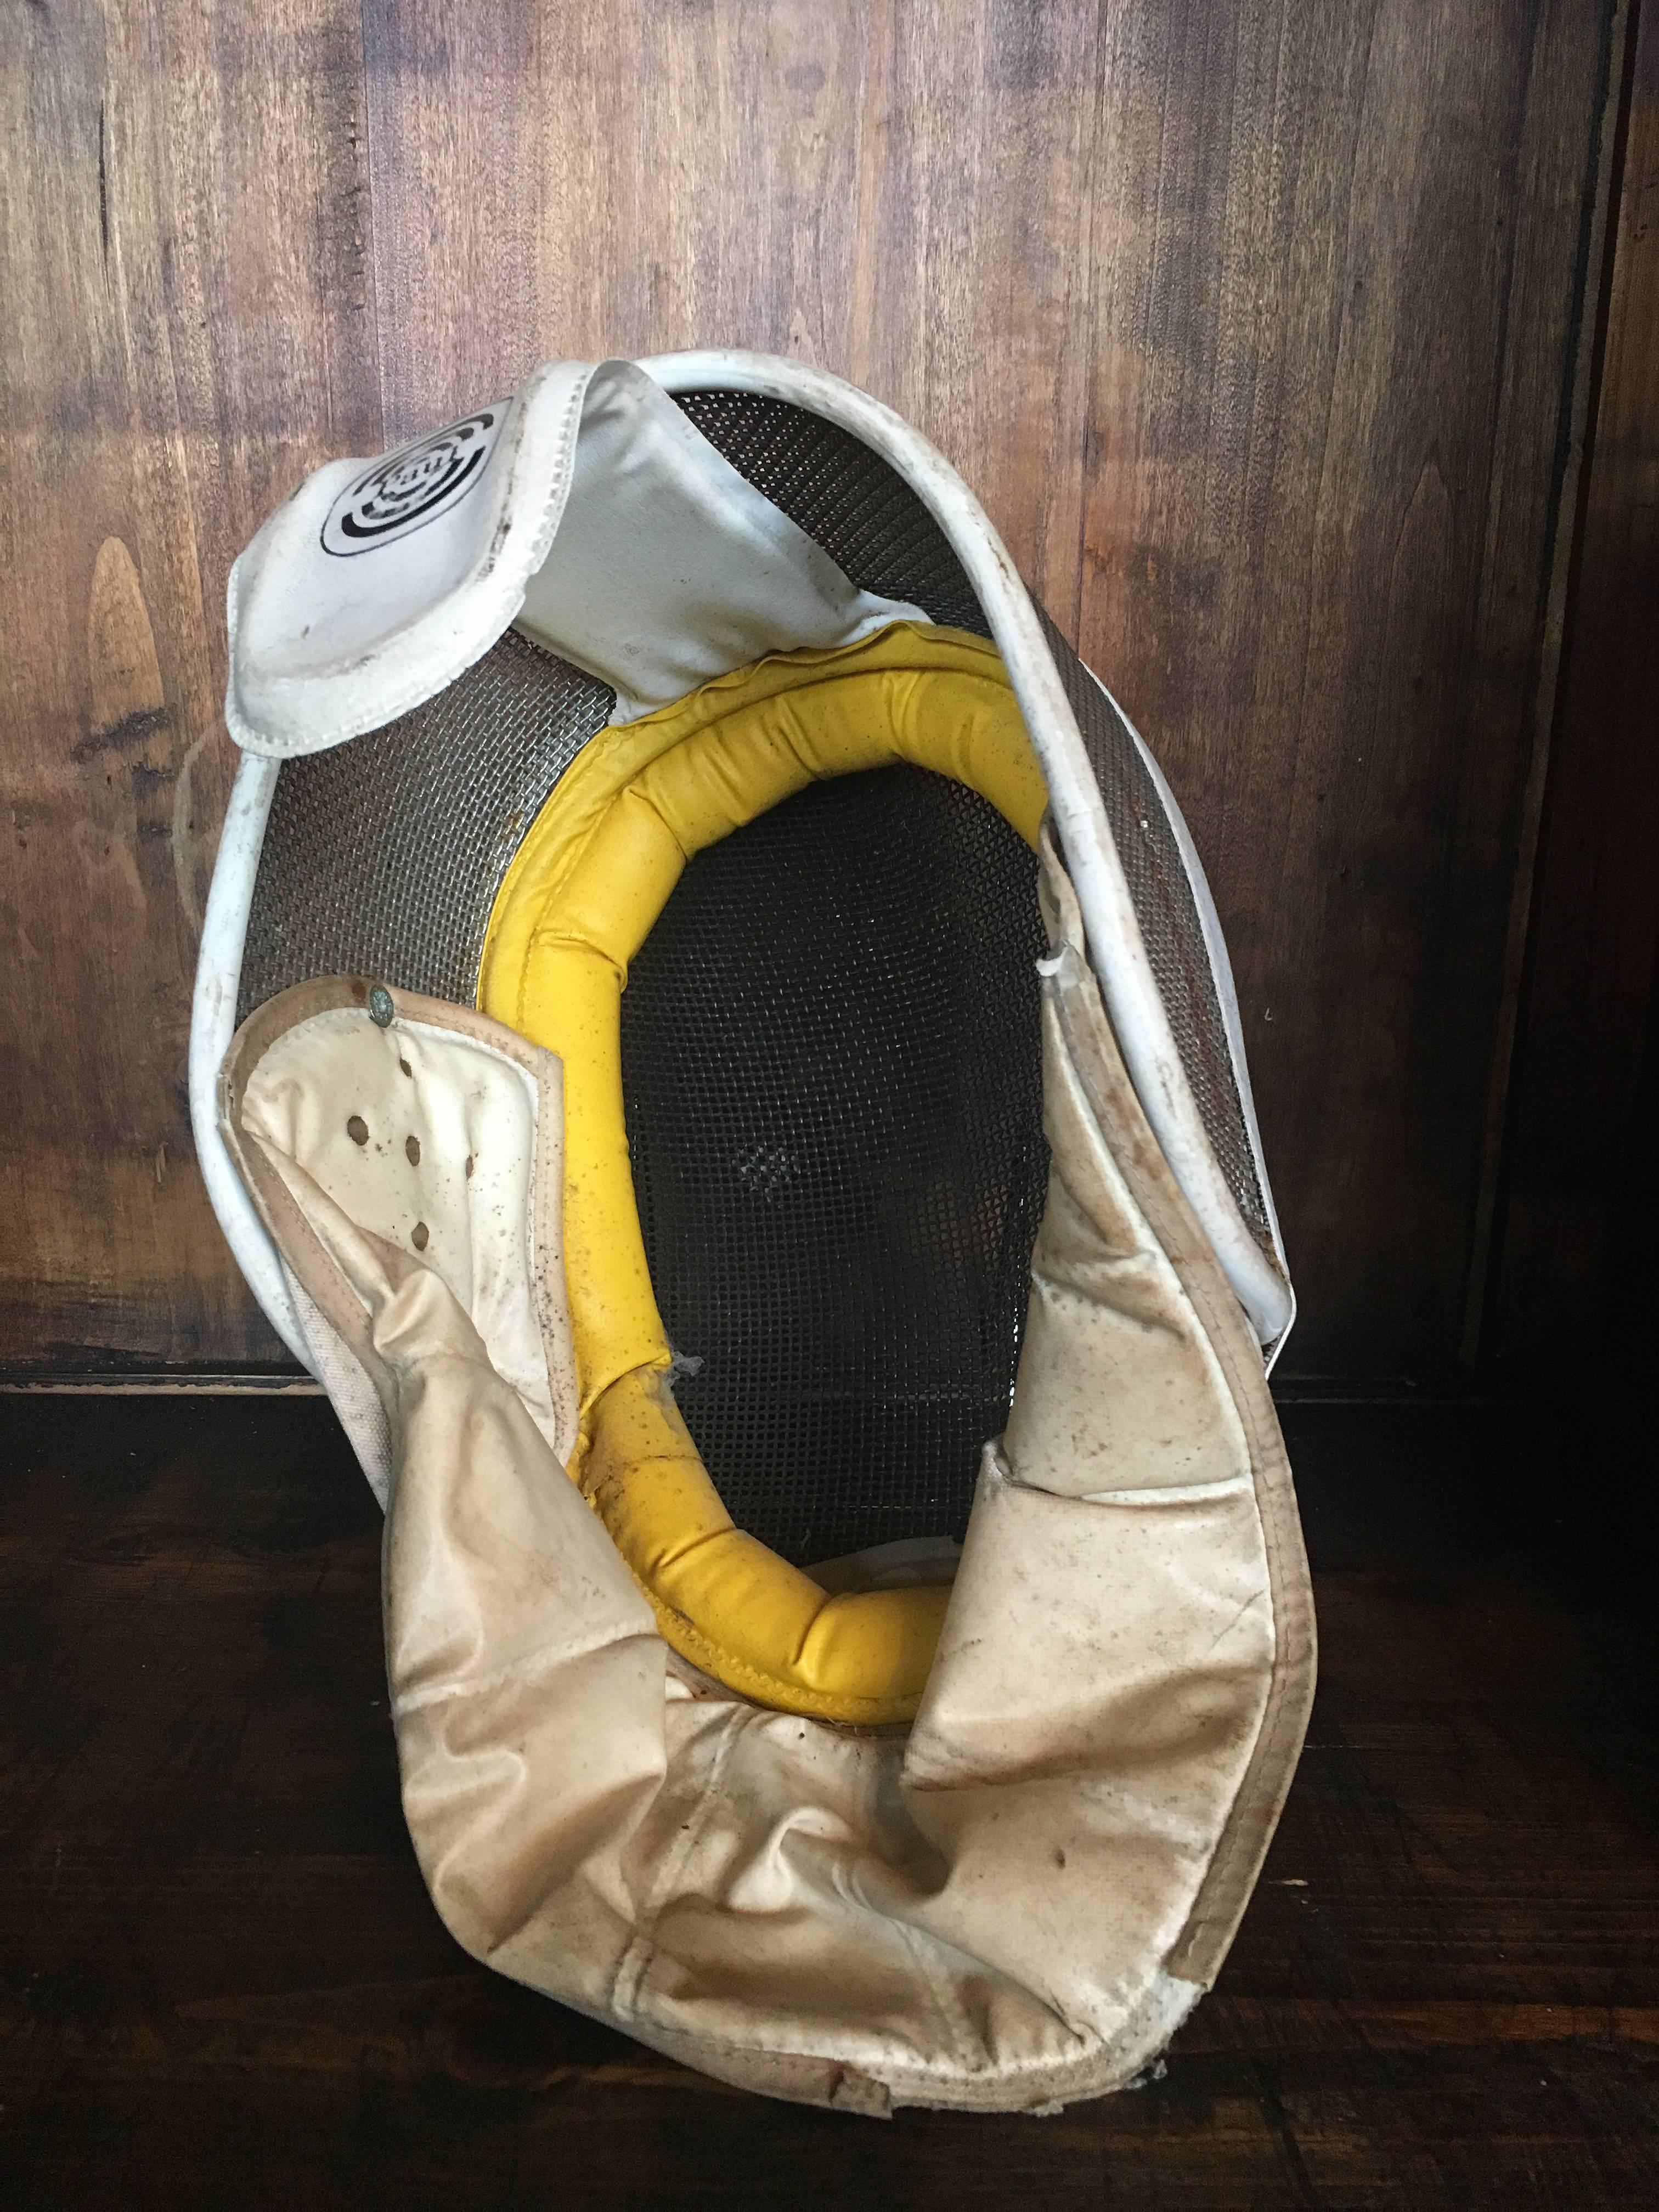 Vintage Leon Paul fencing mask with yellow head band.